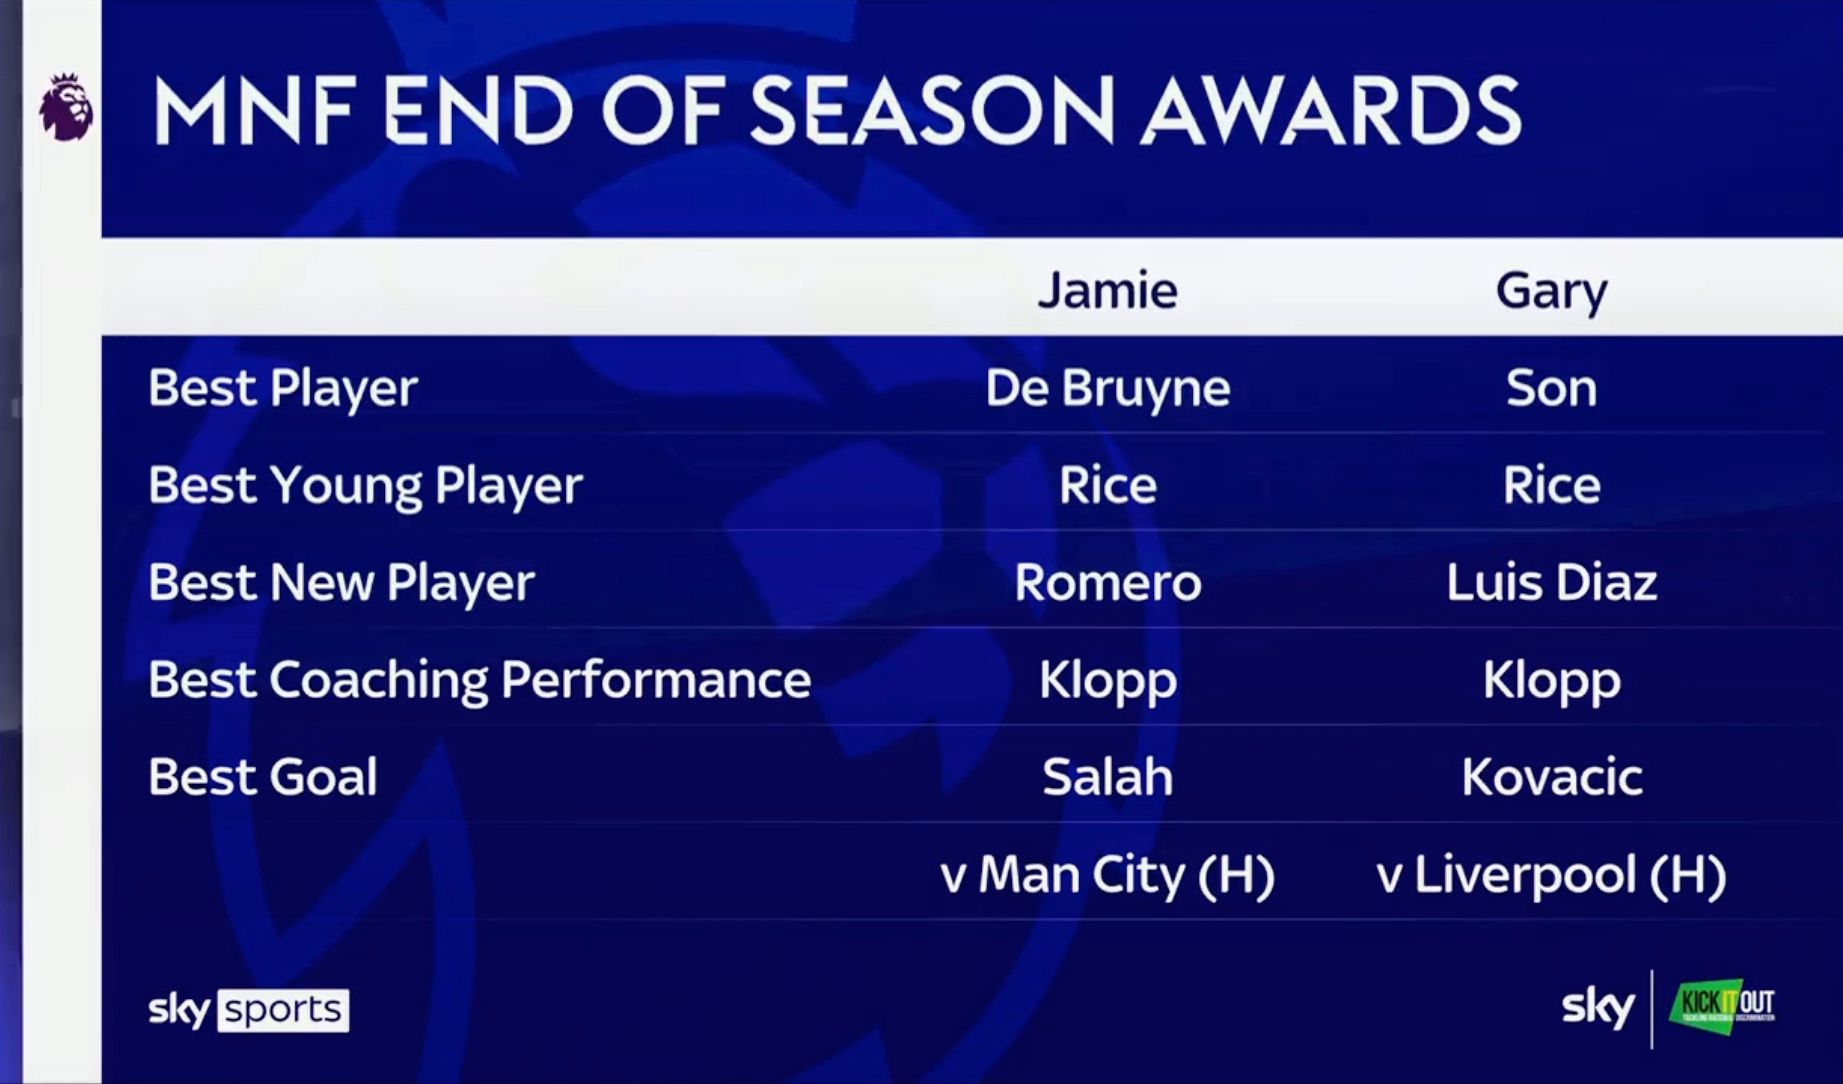 Carragher and Neville end of season awards